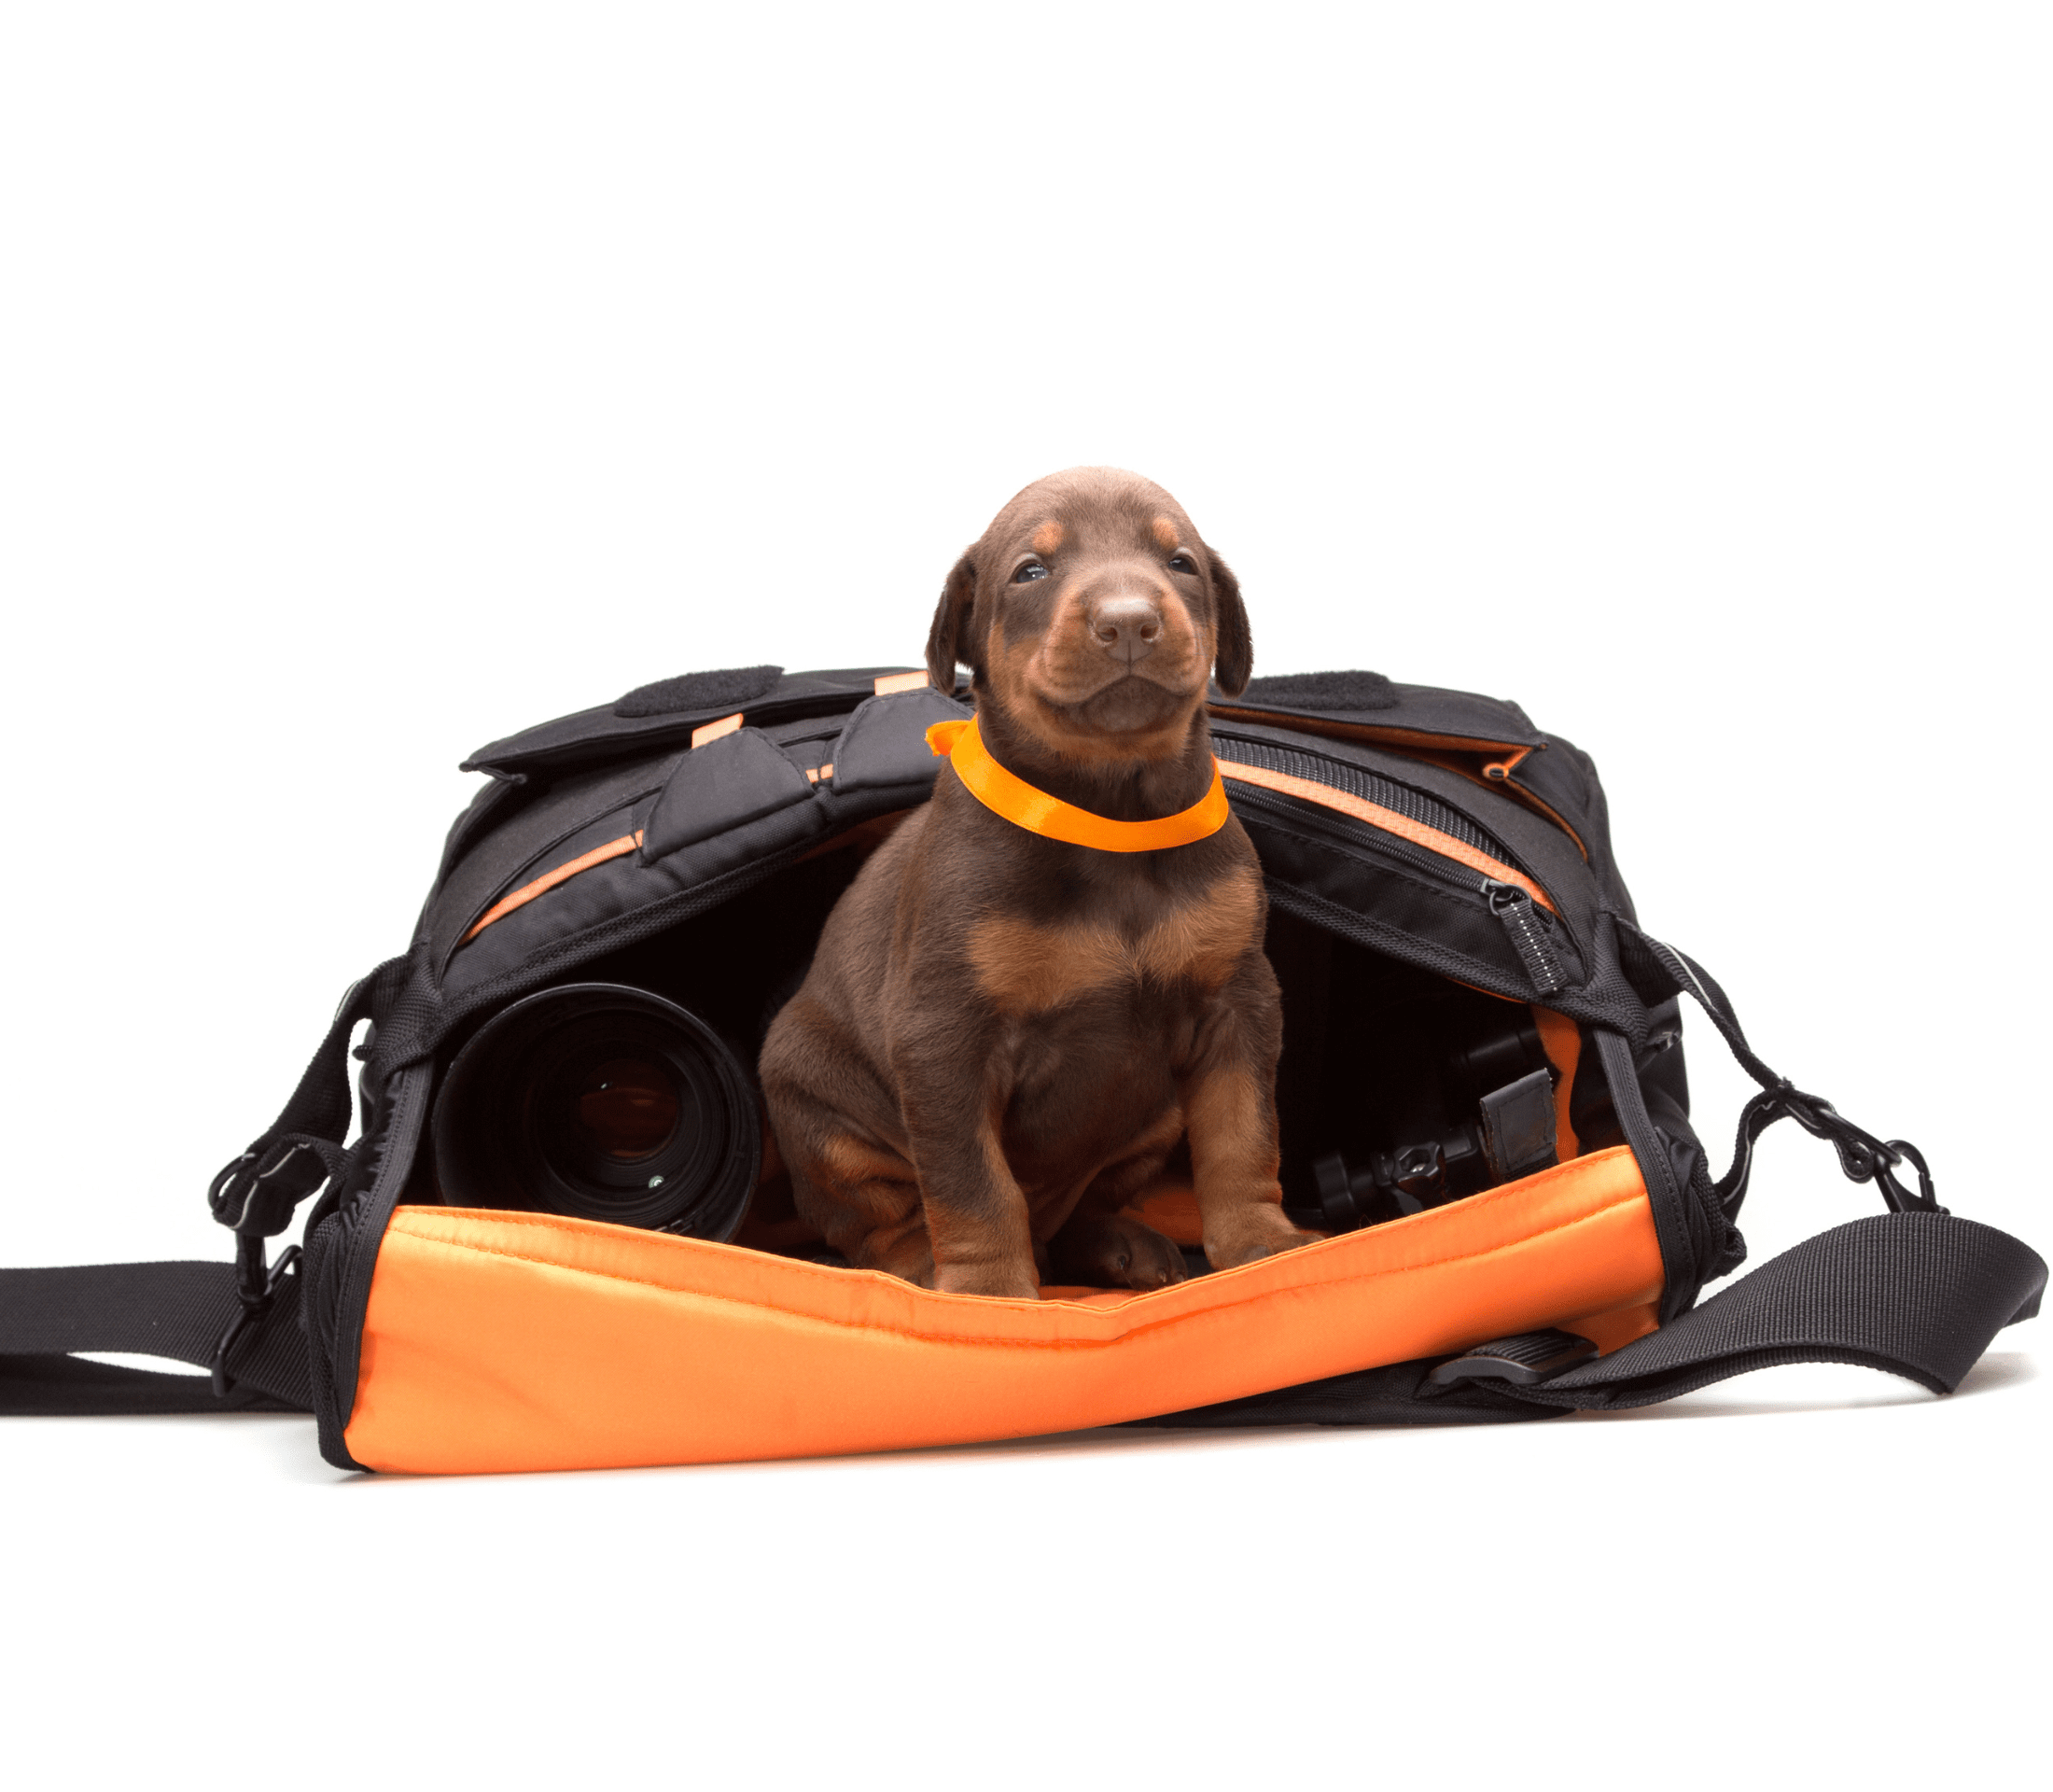 Brown puppy peaking out from an orange-brown duffel bag